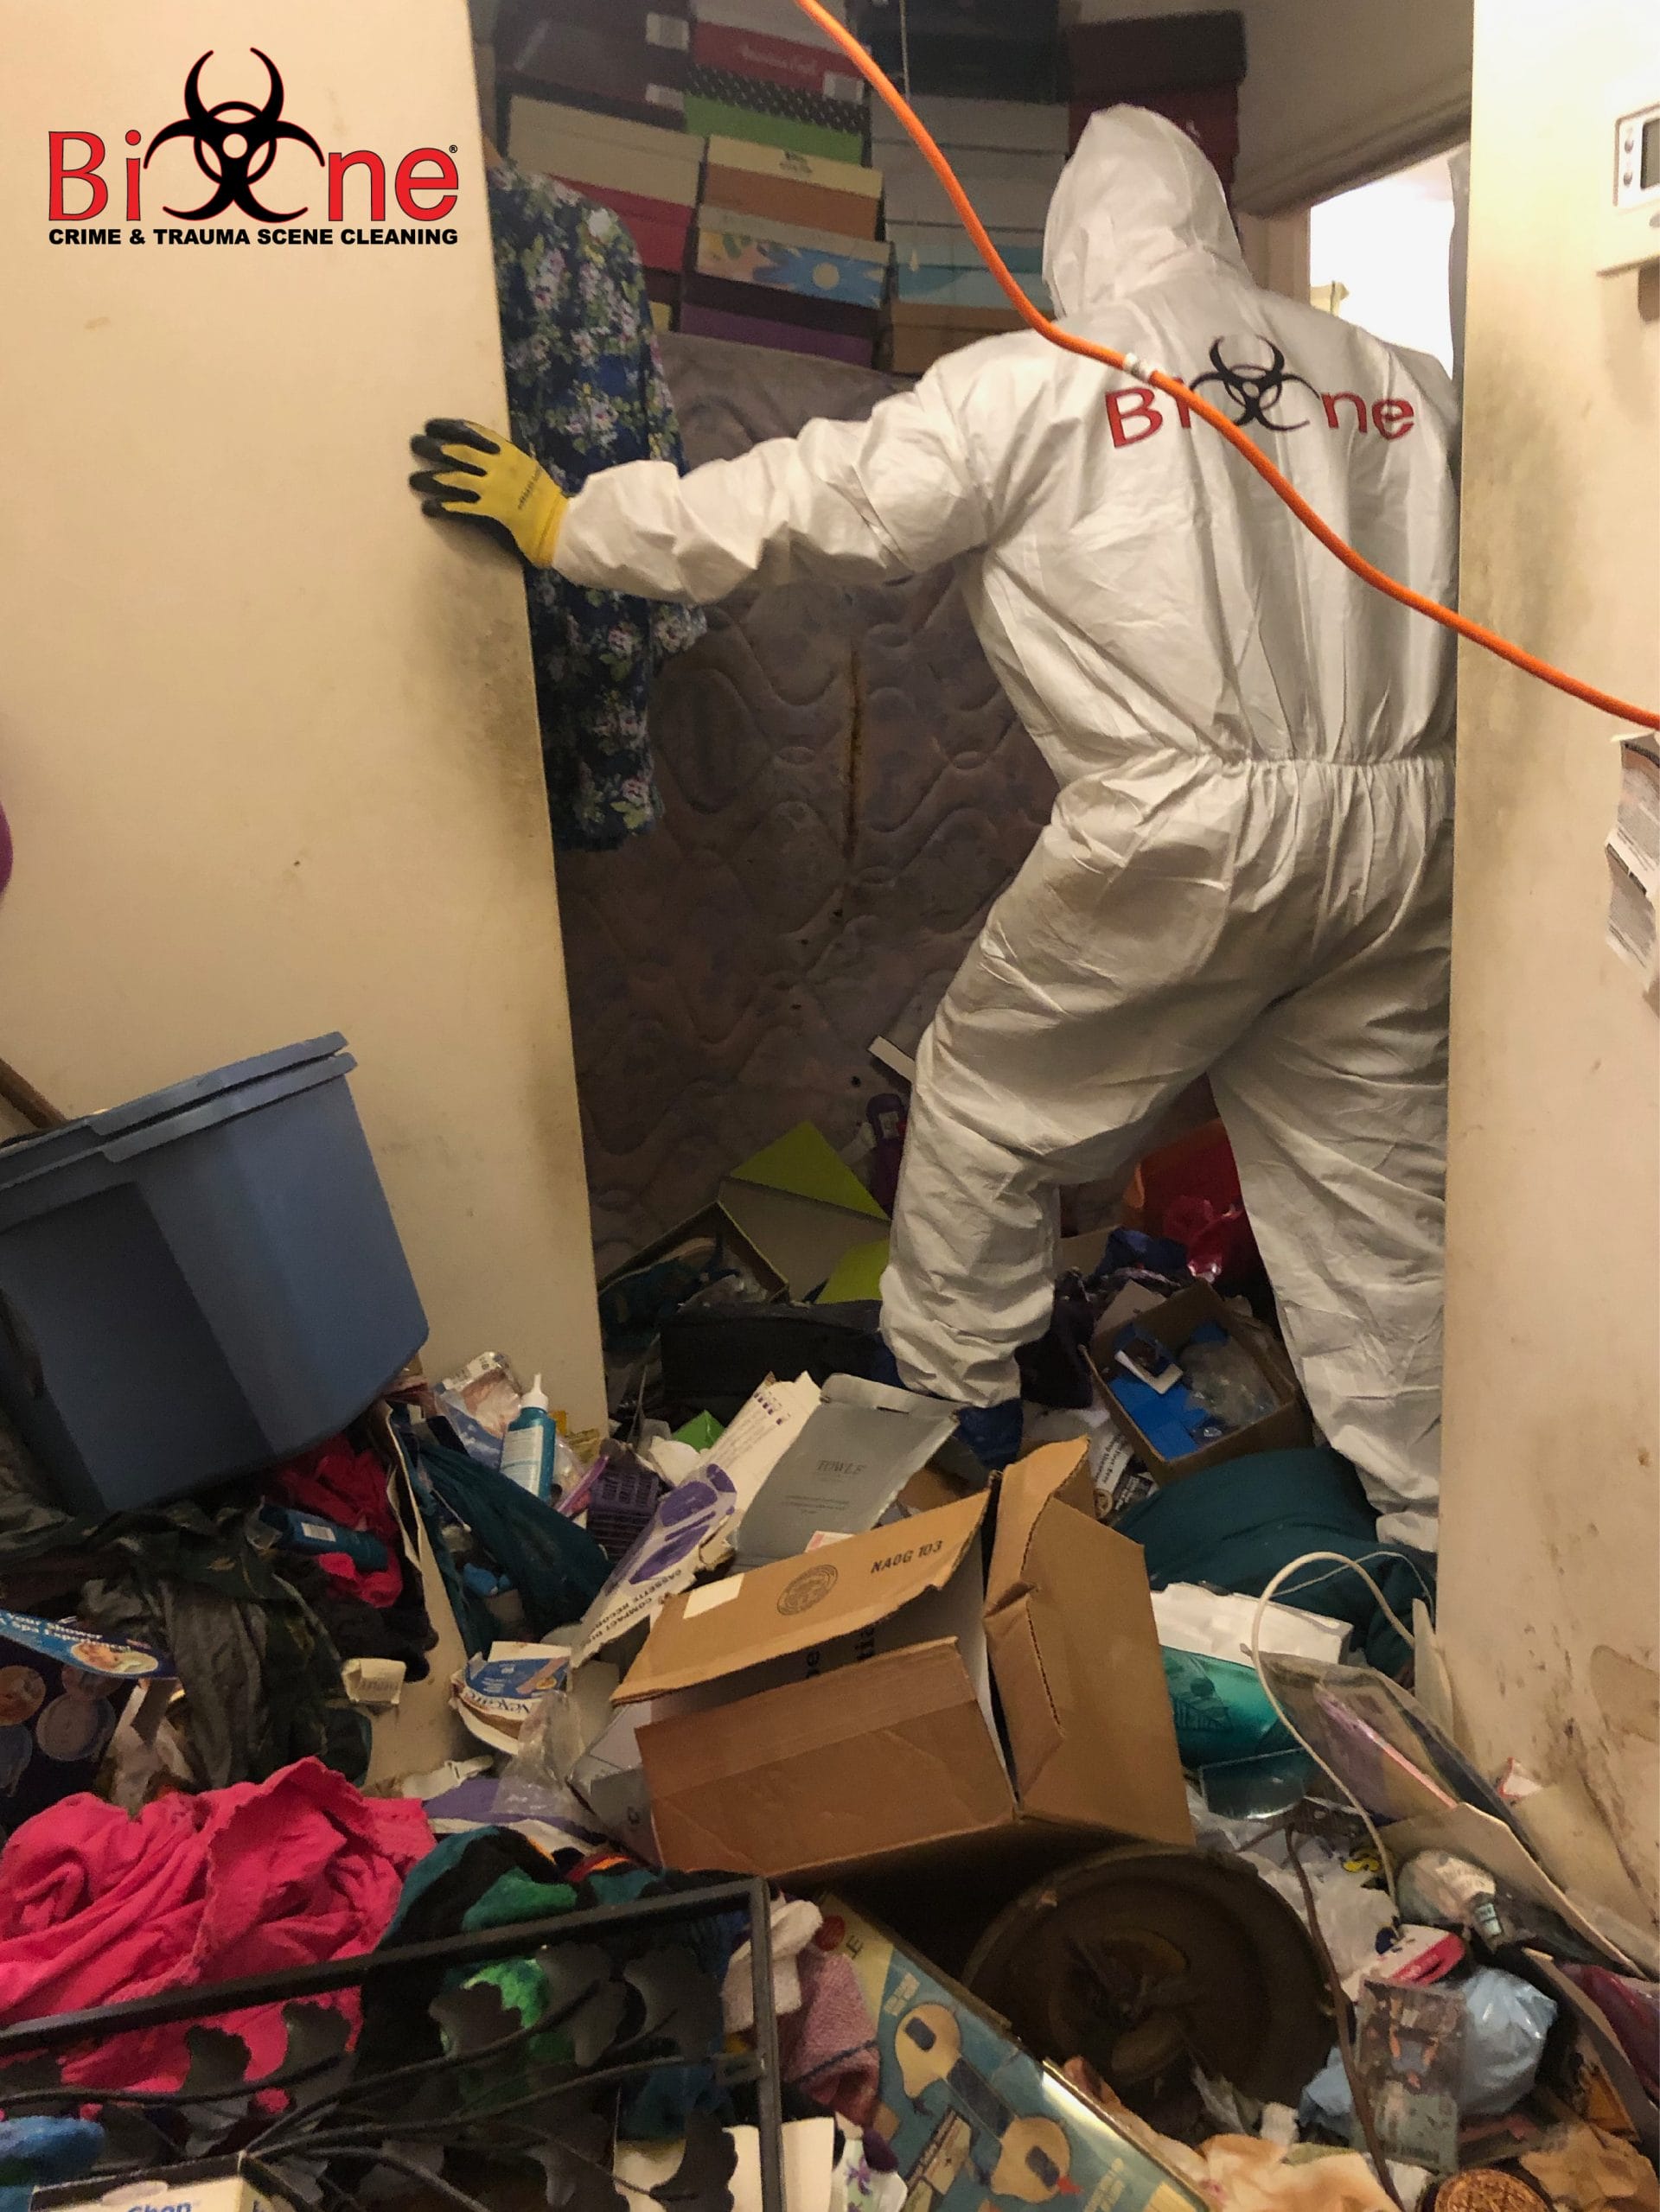 Bio-One of Orange's certified technicians can help you or your loved ones if they're struggling with hoarding disorder. We can take care of removing clutter and hazardous materials that may pose health and safety threats.